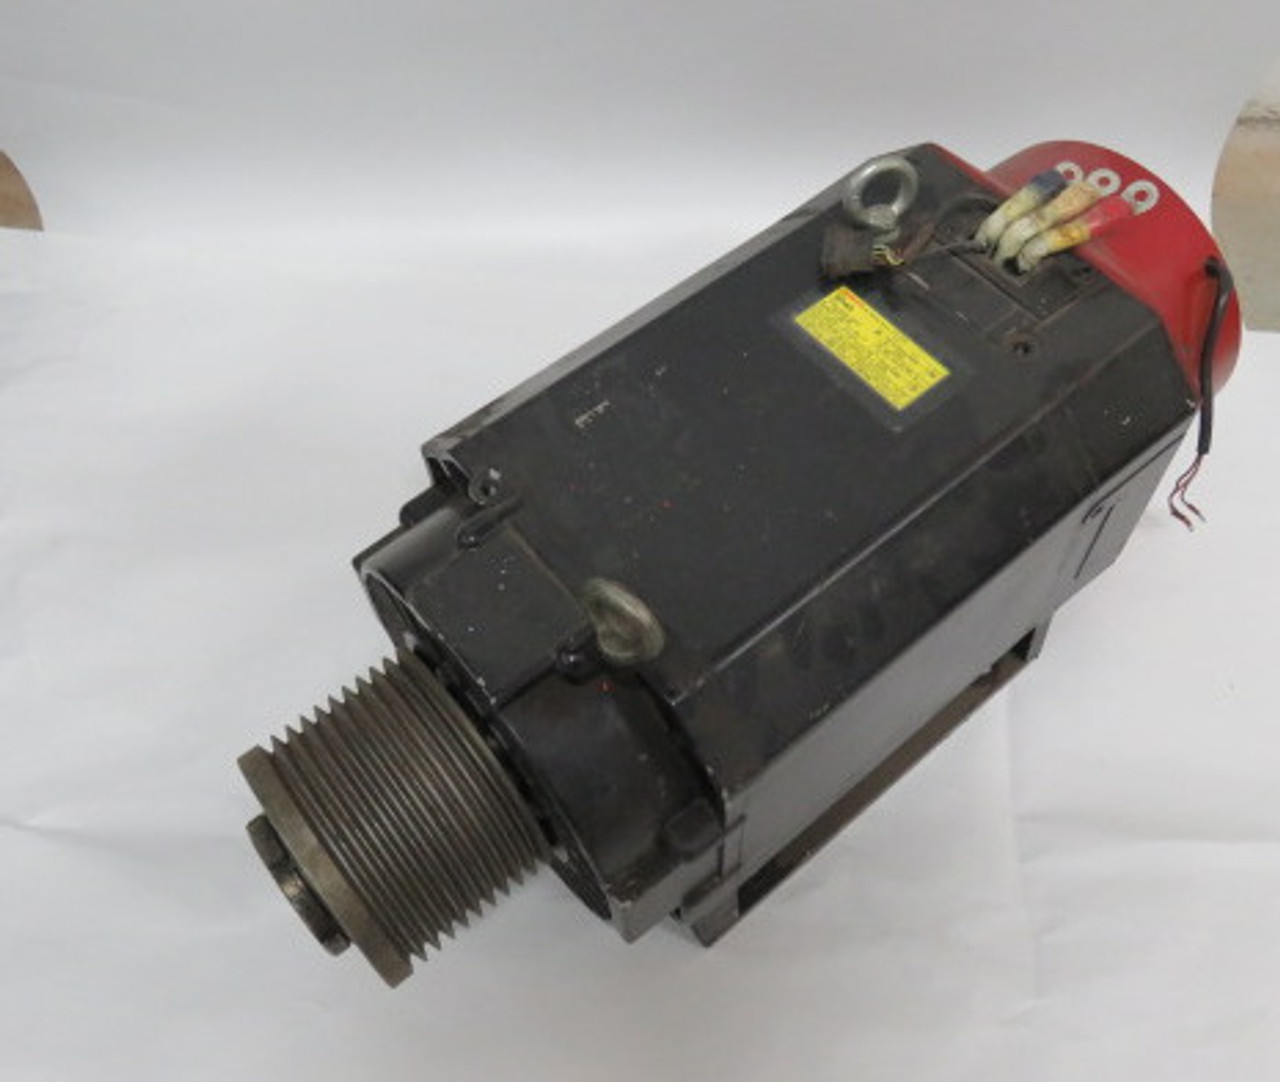 Fanuc A06B-0831-B200 AC Spindle Motor *Missing Electrical Box* ! AS IS !